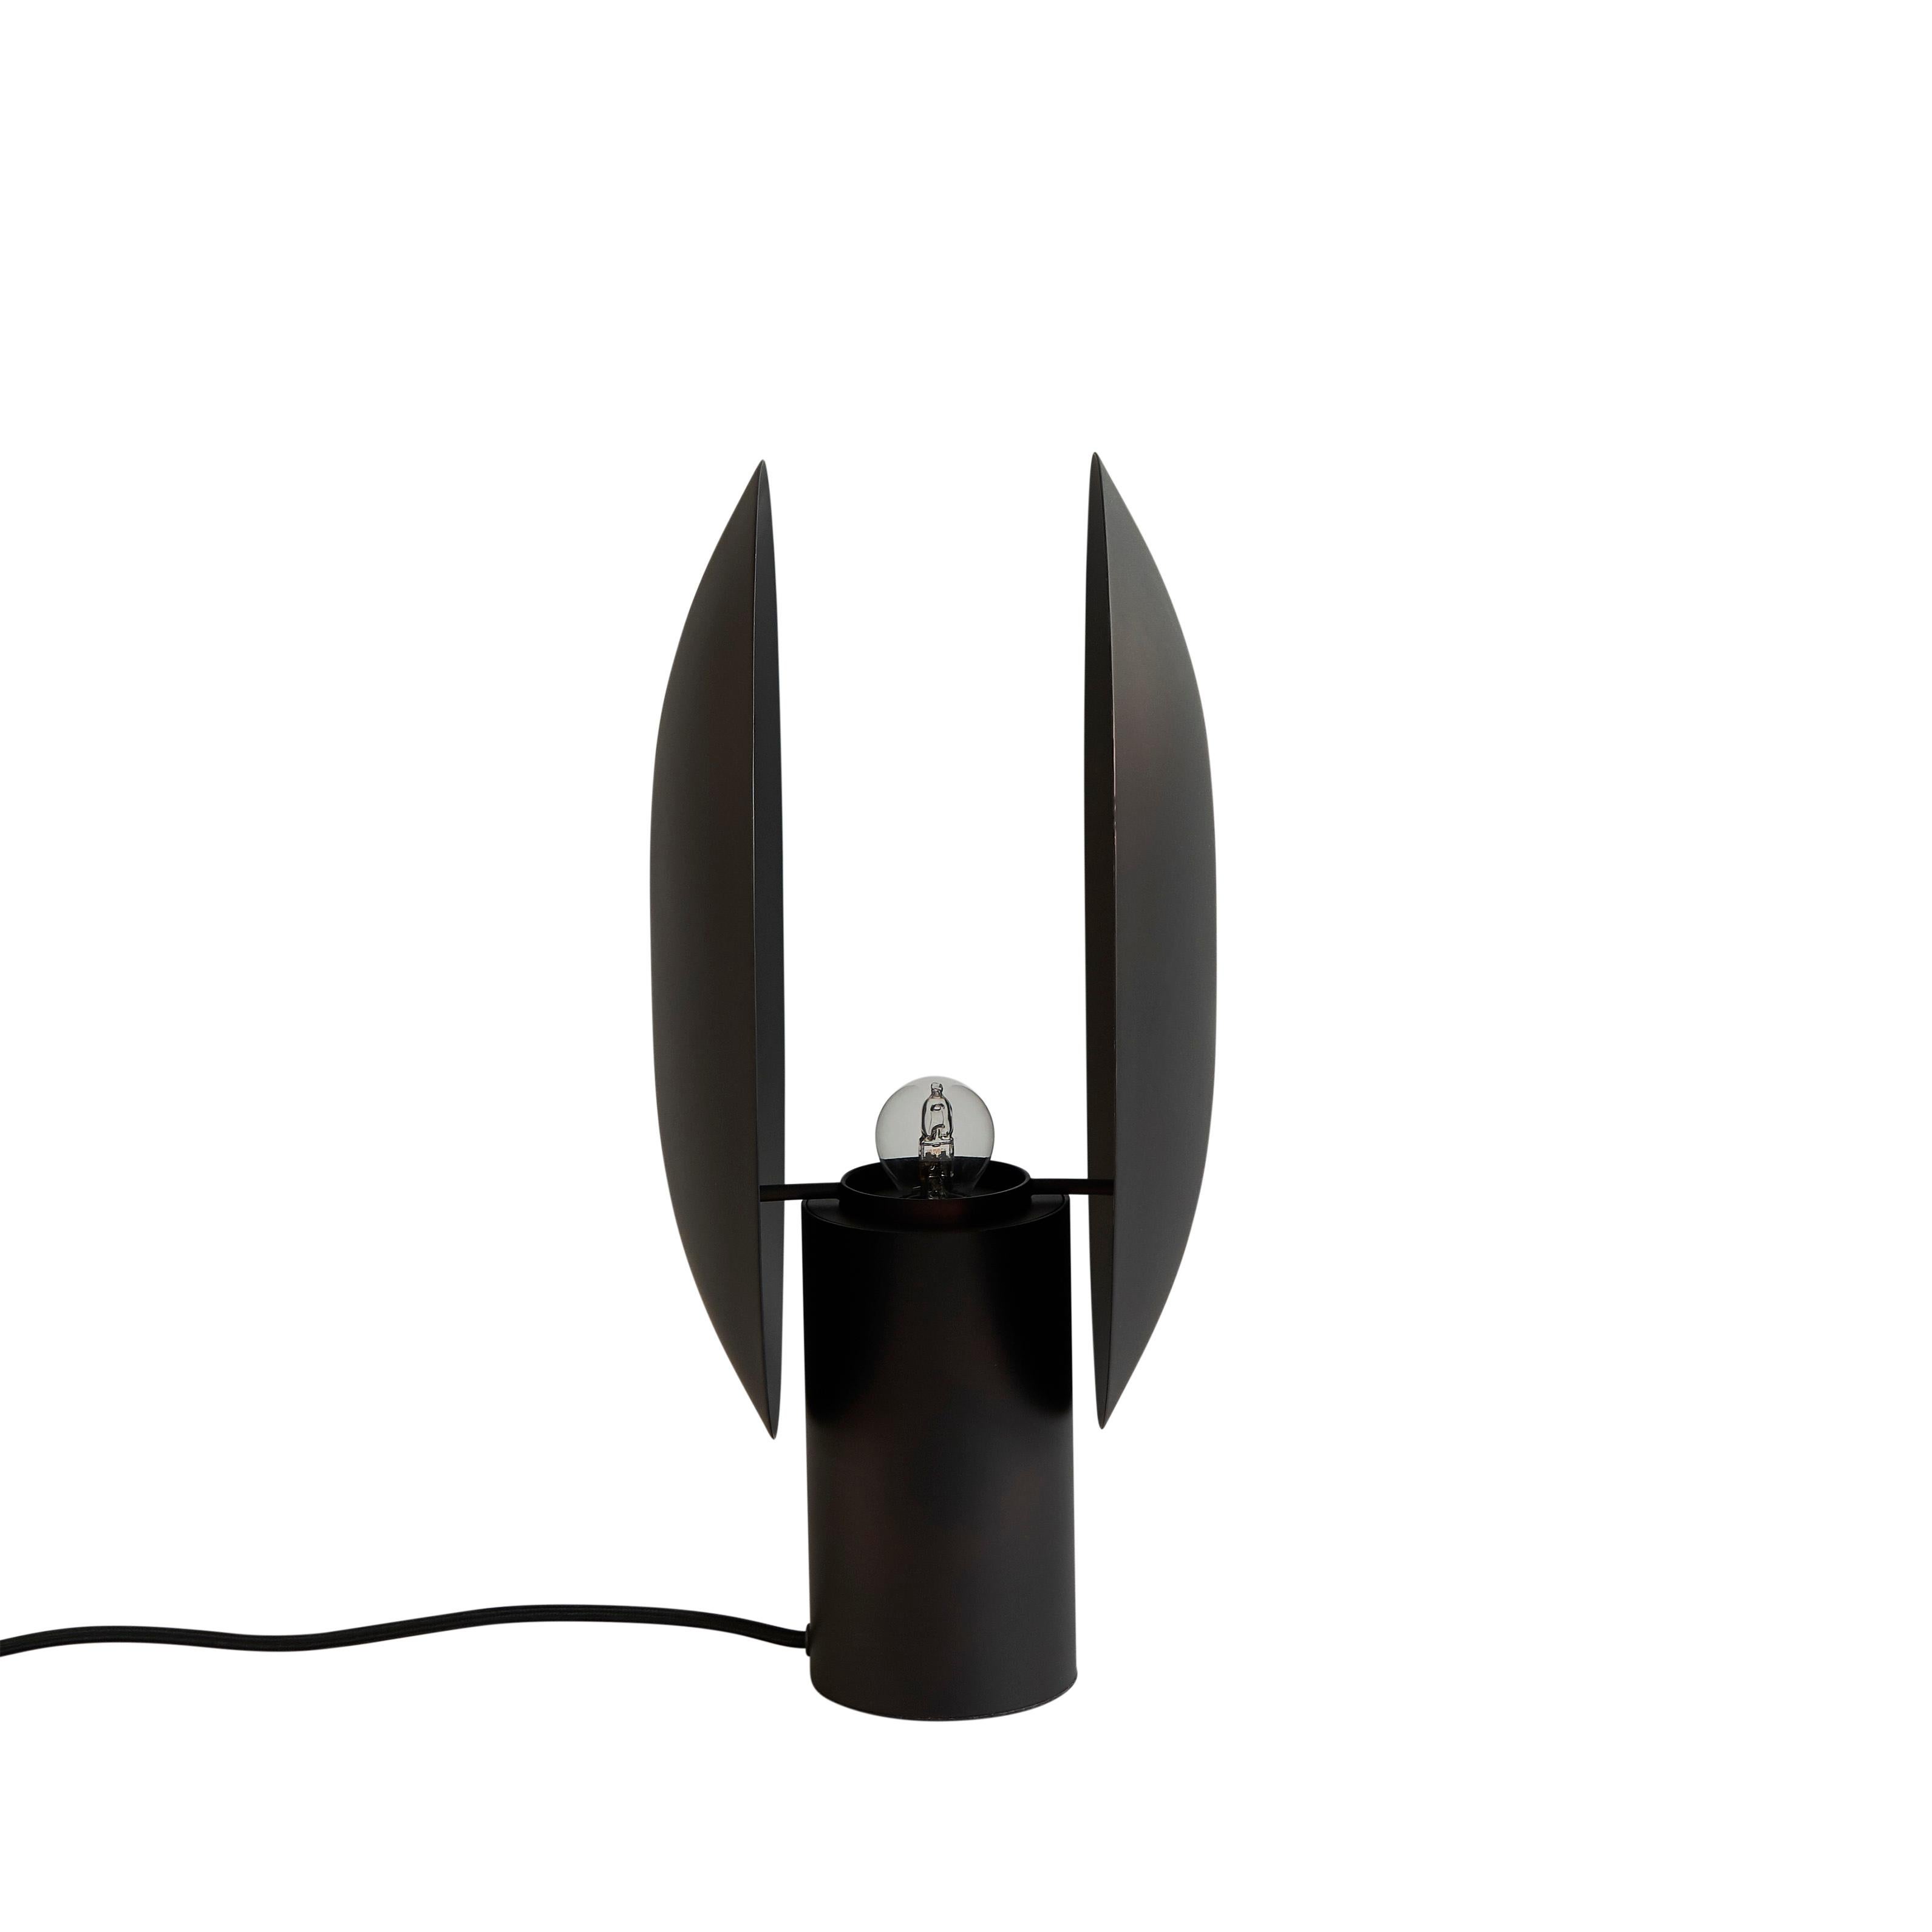 Burned Black Metal Clam table lamp by 101 Copenhagen
Designed by Kristian Sofus Hansen & Tommy Hyldahl
Dimensions: L 30 x W 15 x H 43,5 cm
Cable length: 200 cm
This product is not wired for USA
Materials: Metal: Burned Black metal
Cable: Fabric